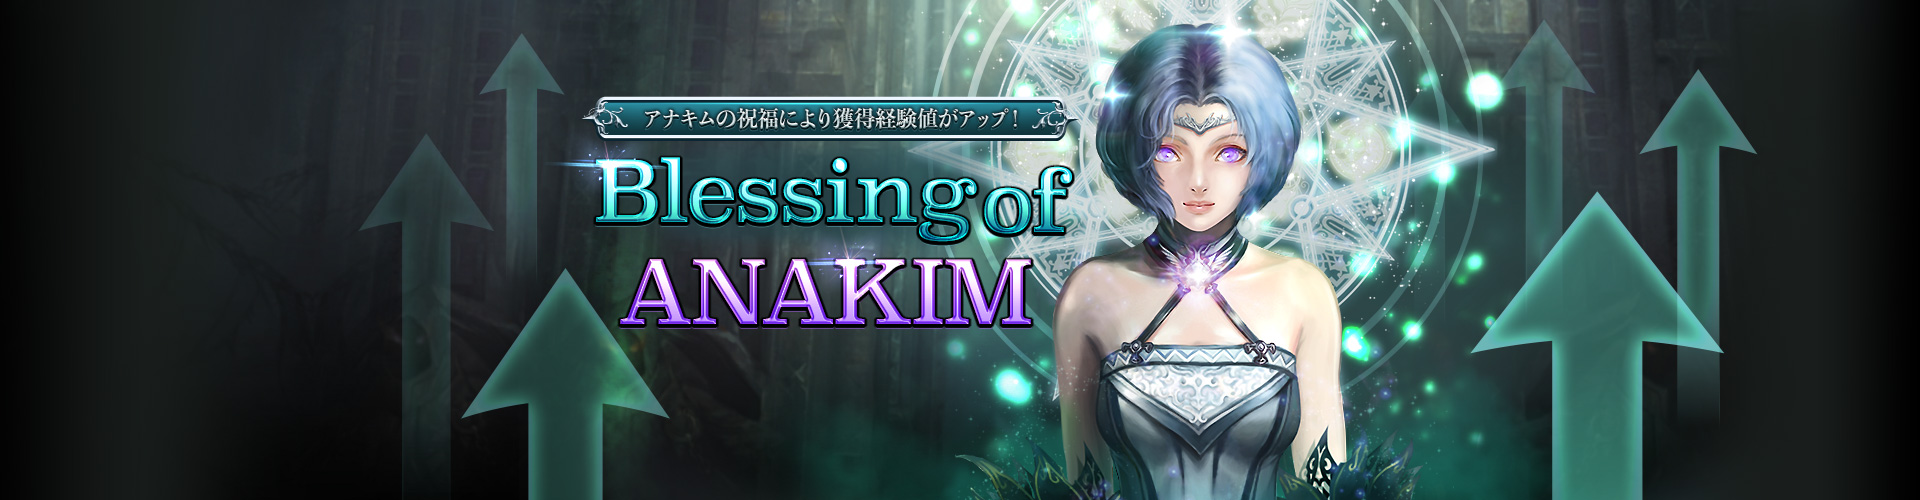 BLESSING OF ANAKIM